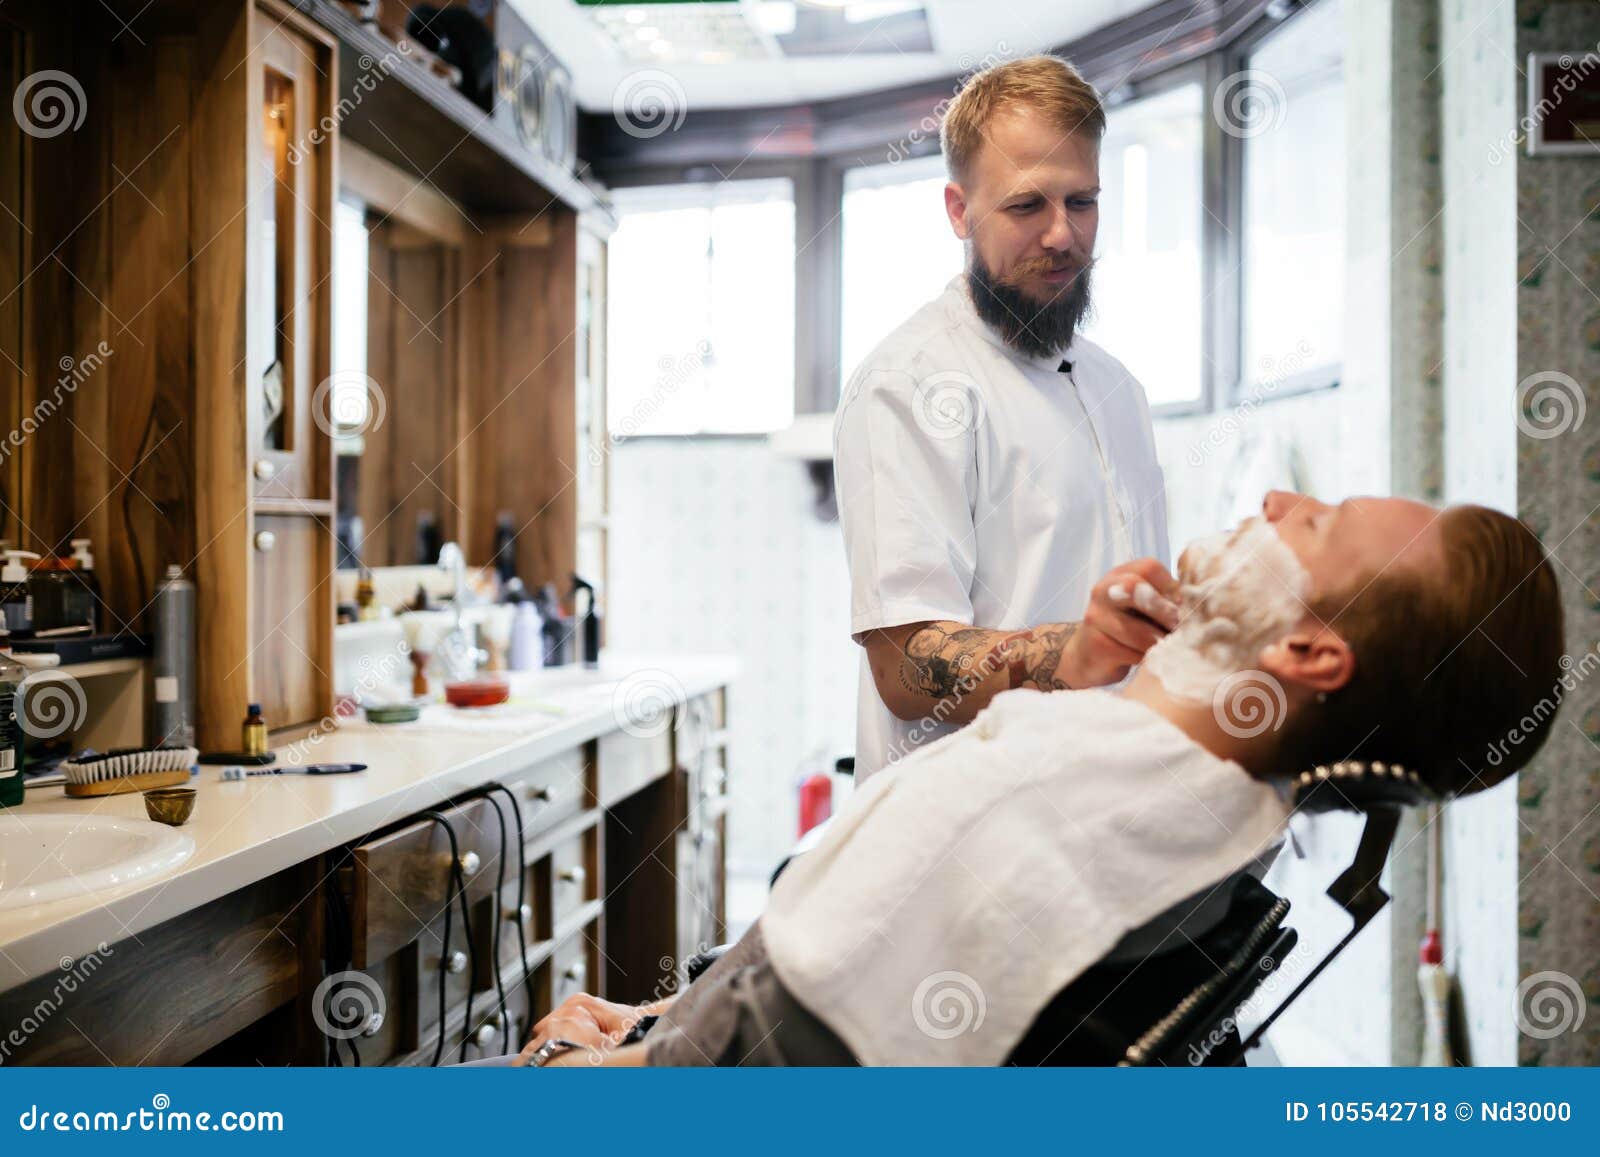 Hair Beard and Mustache Treatment Stock Photo - Image of hairdresser ...